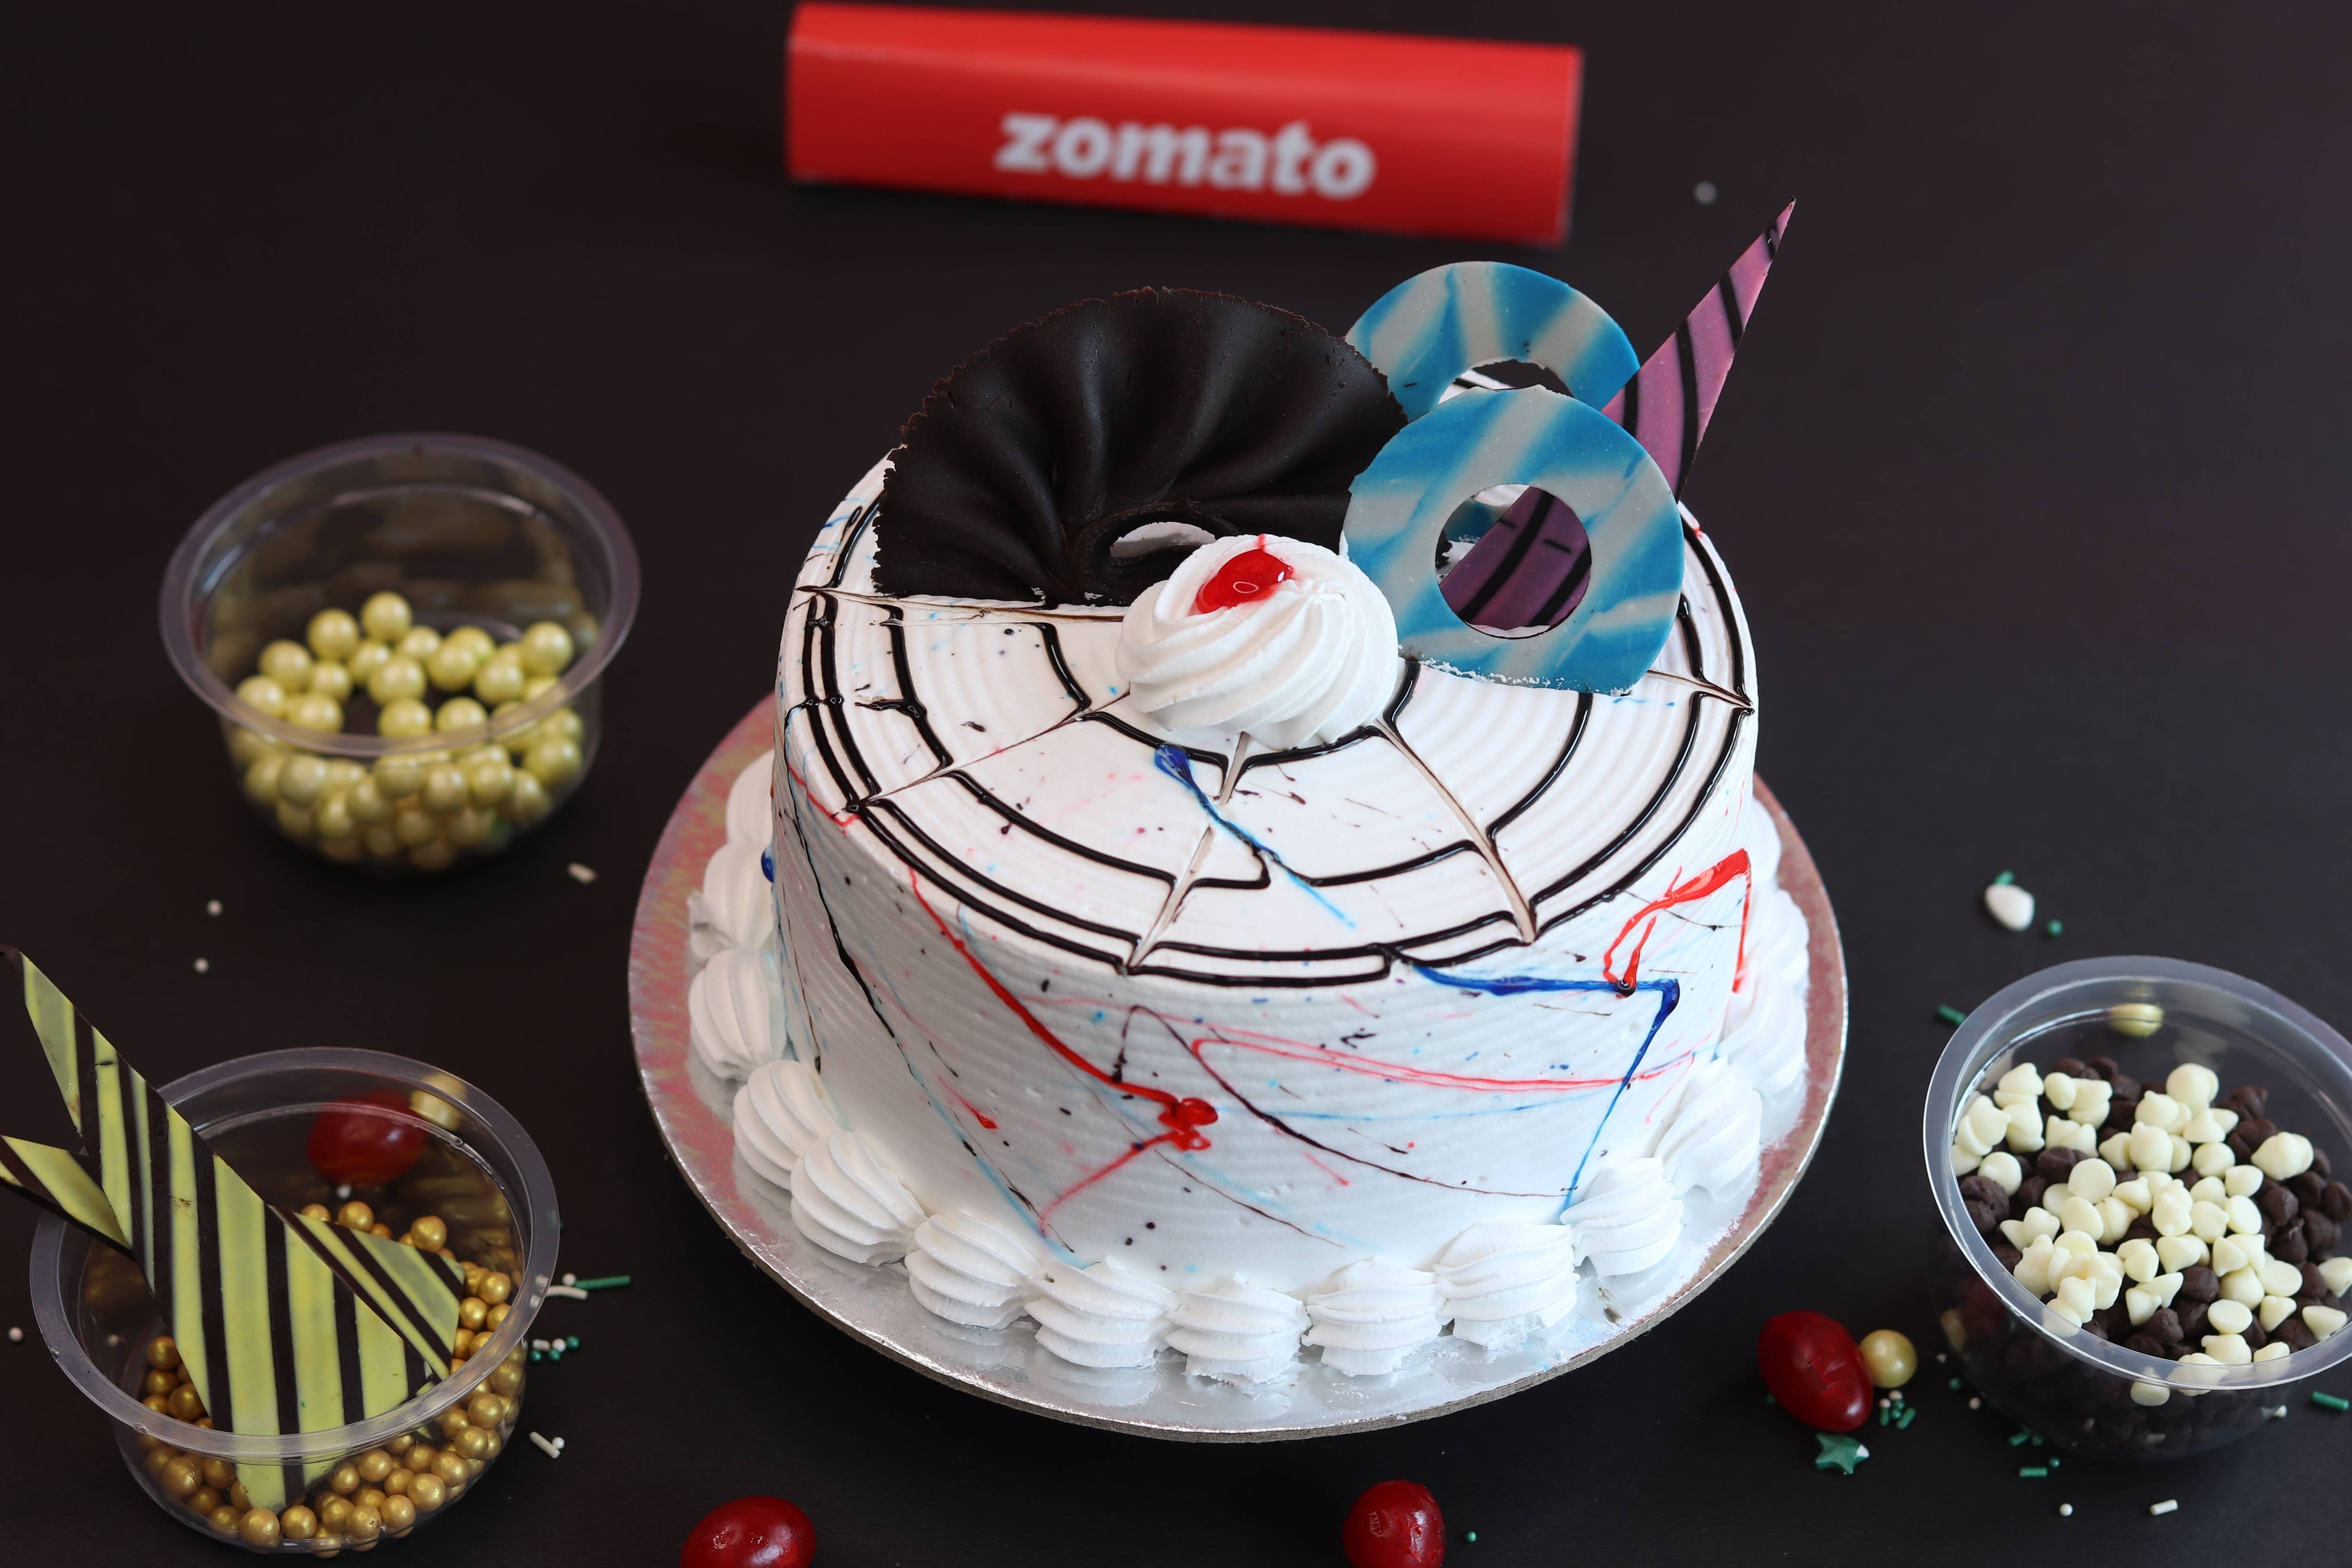 Photos of The Cake Delicieux, Pictures of The Cake Delicieux, Faridabad |  Zomato